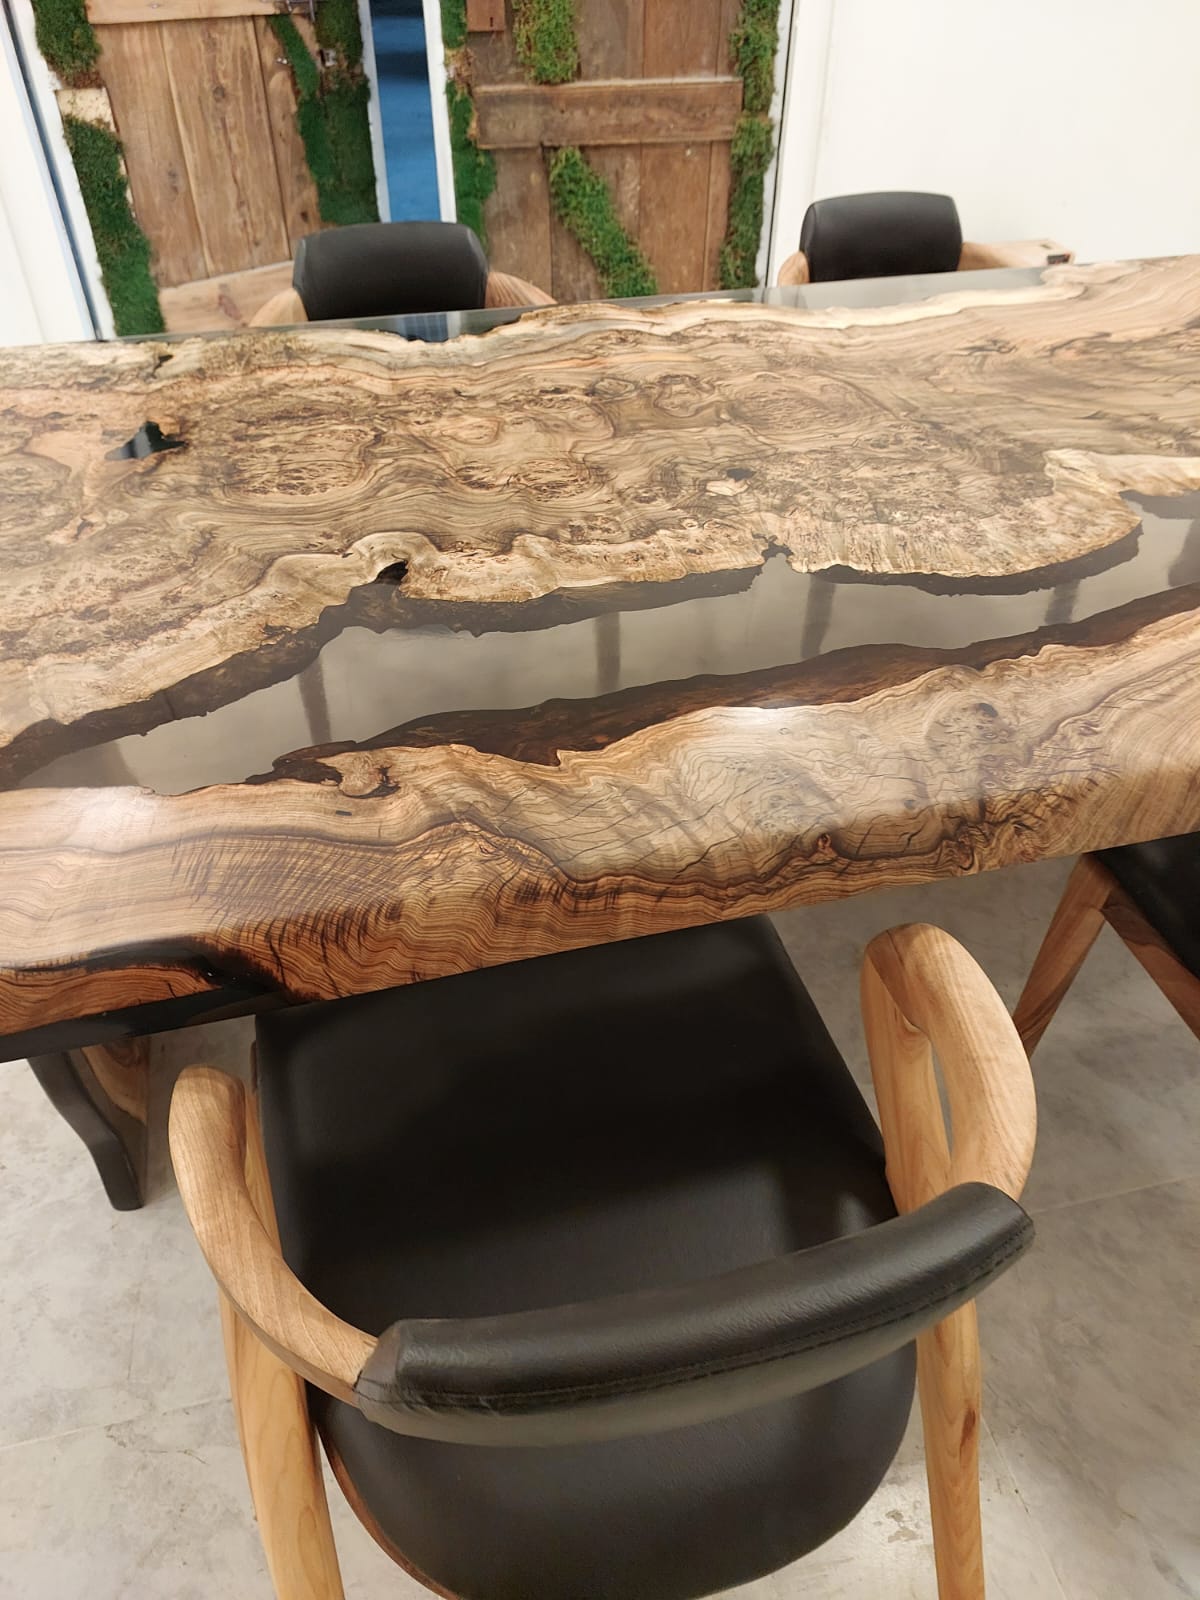 Ebony Wood Table: Dining / Desk / Coffee / Gaming Table Solid Wood Black  River Resin Bespoke Hand Crafted Personalised 